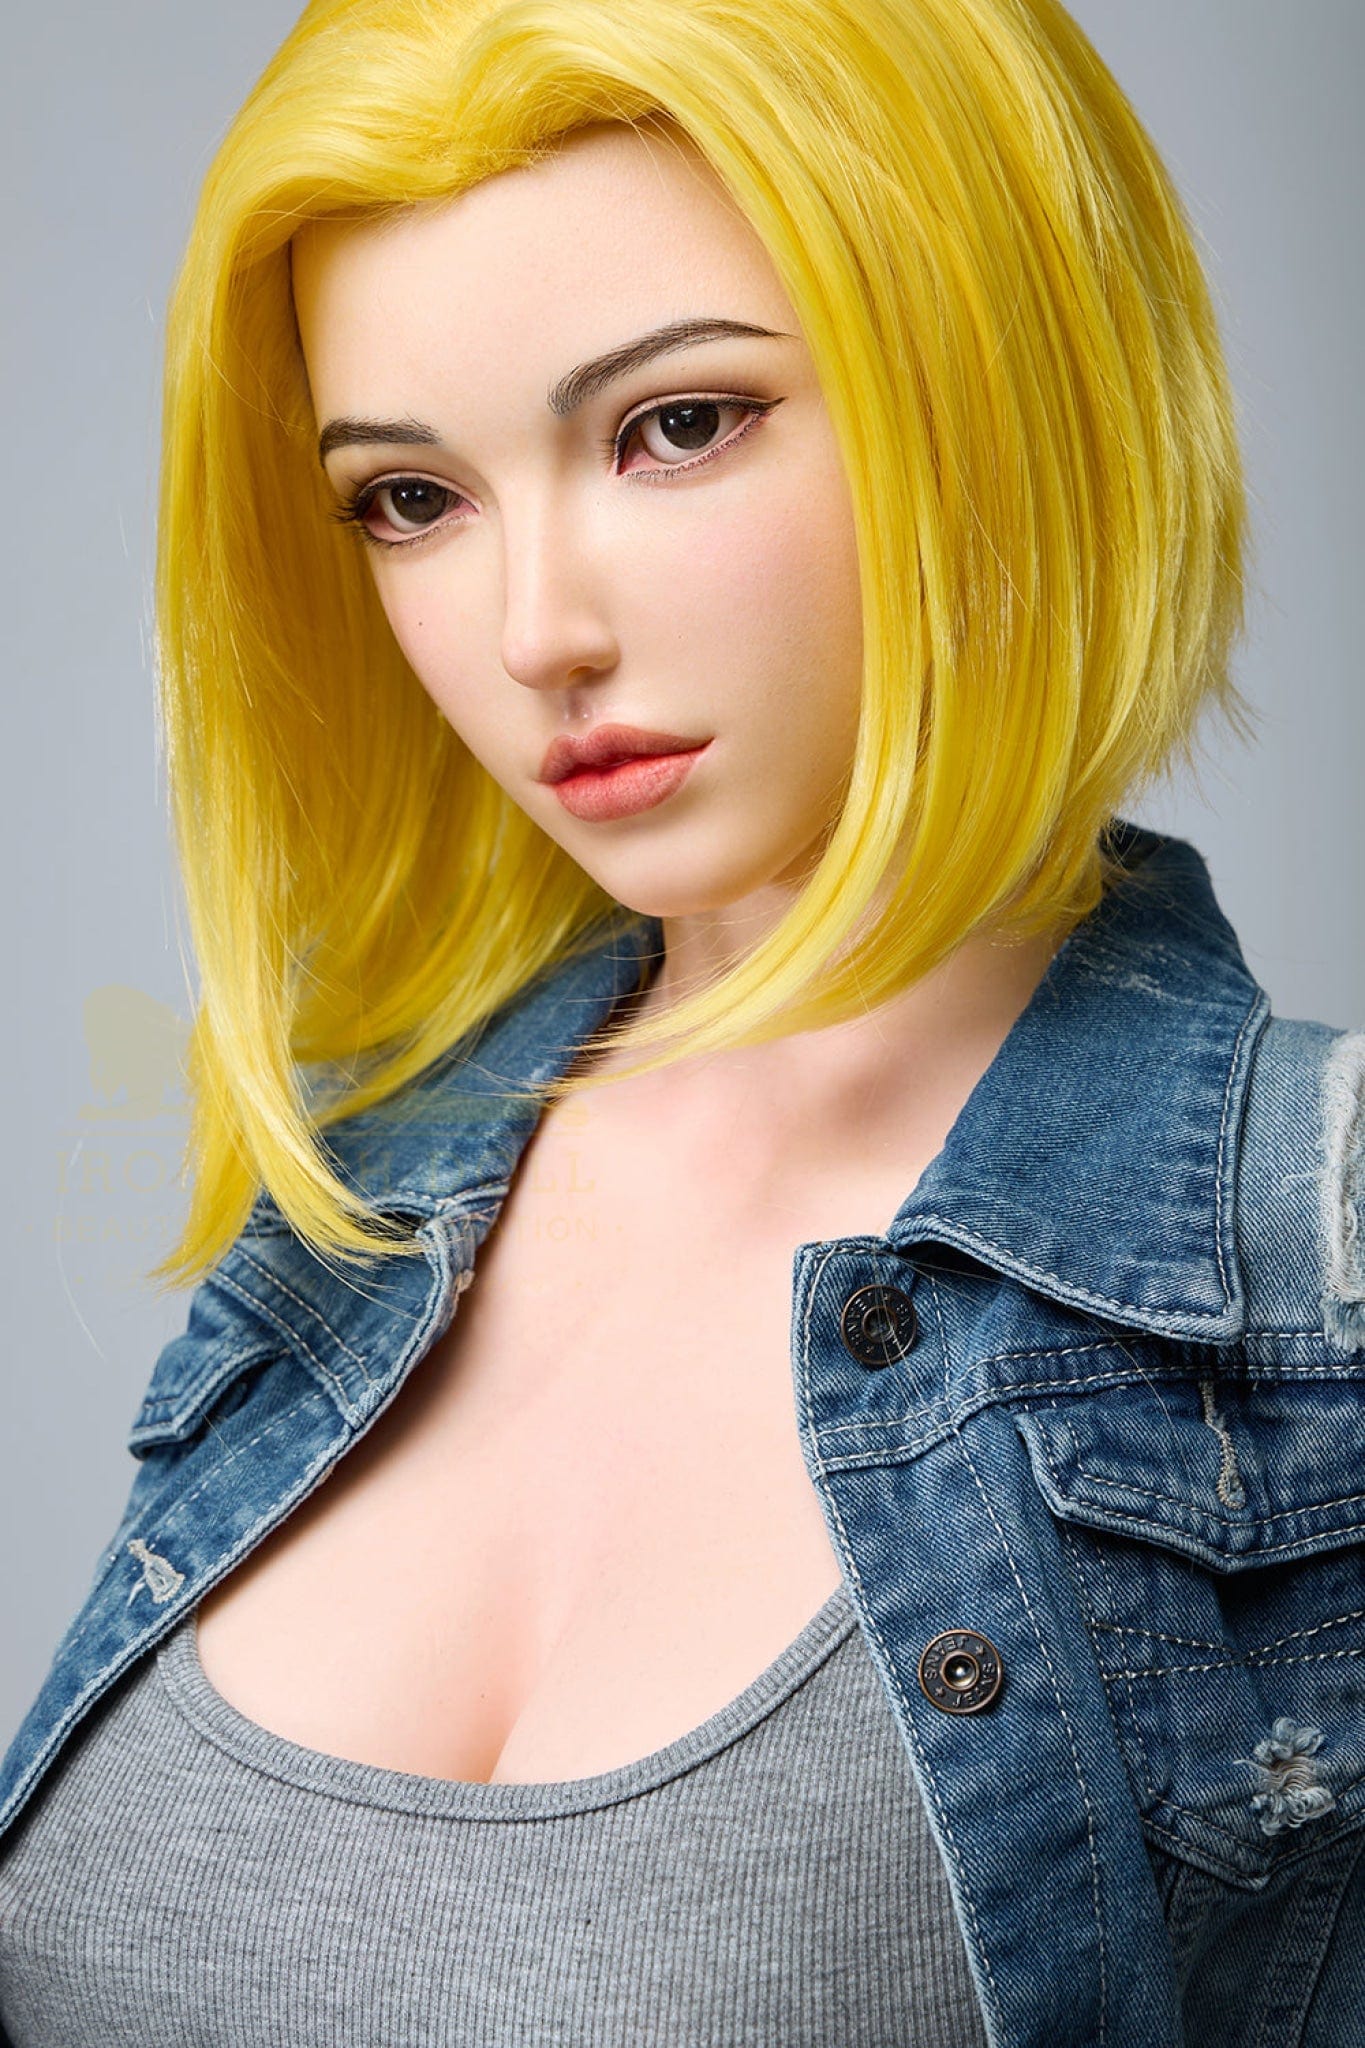 Doll Authority SEX DOLL 5'2" (159cm) - E-Cup Silicone Body Ashley Realistic Silicone Sex Doll - Super Realistic Silicone Series - IronTech Doll®